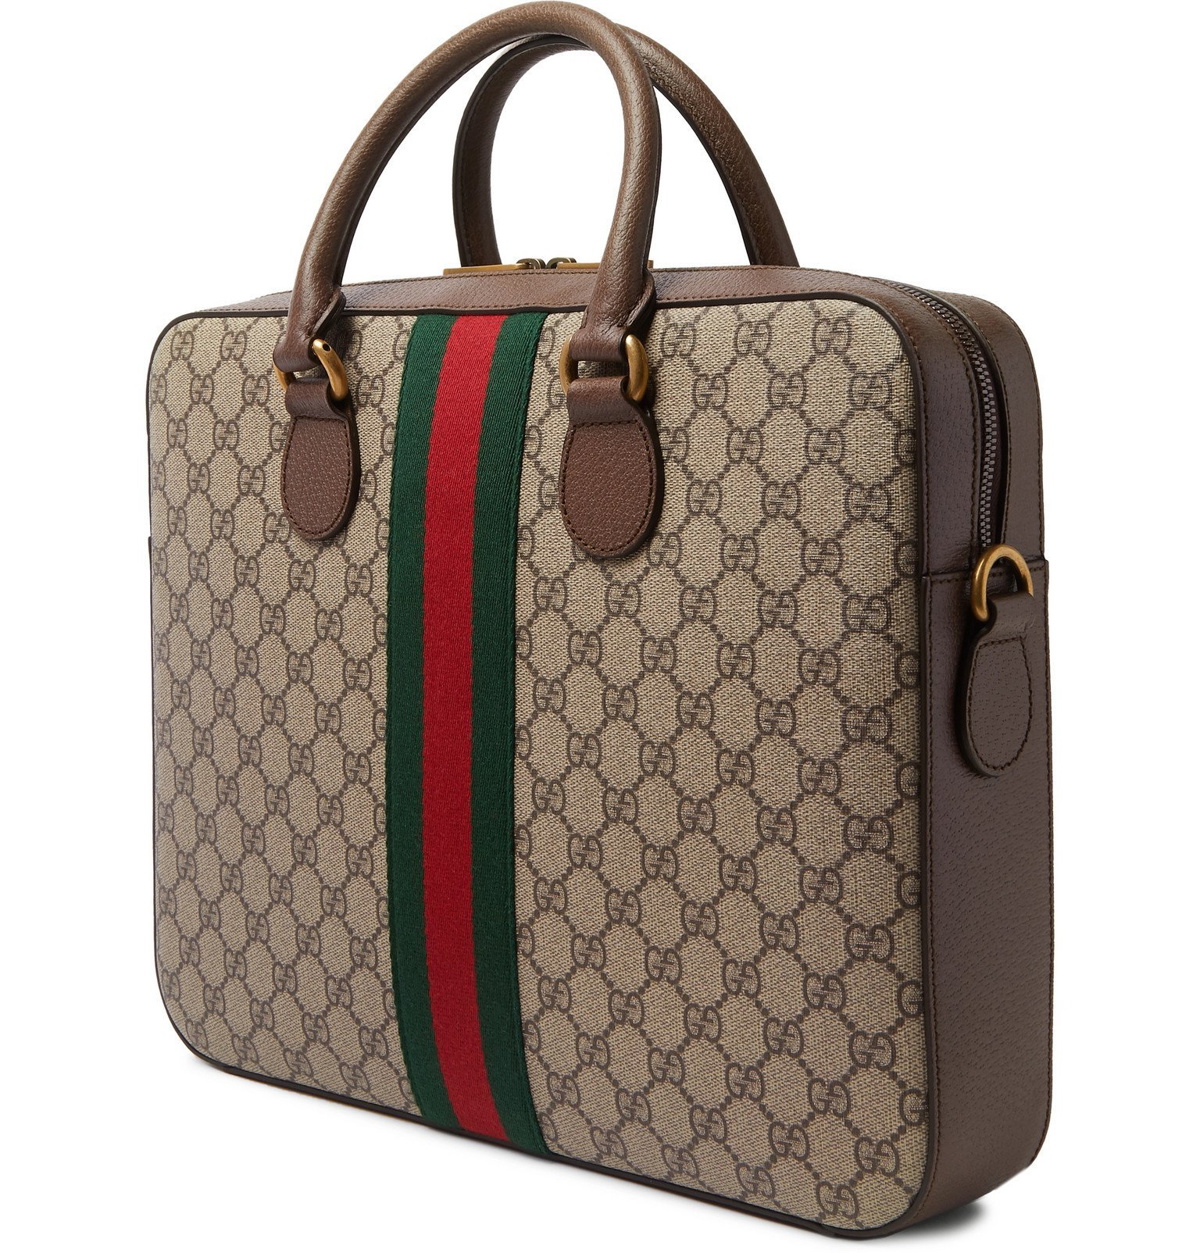 Gucci, Ophidia Leather-Trimmed Monogrammed Coated-Canvas Tote Bag, Men, Brown